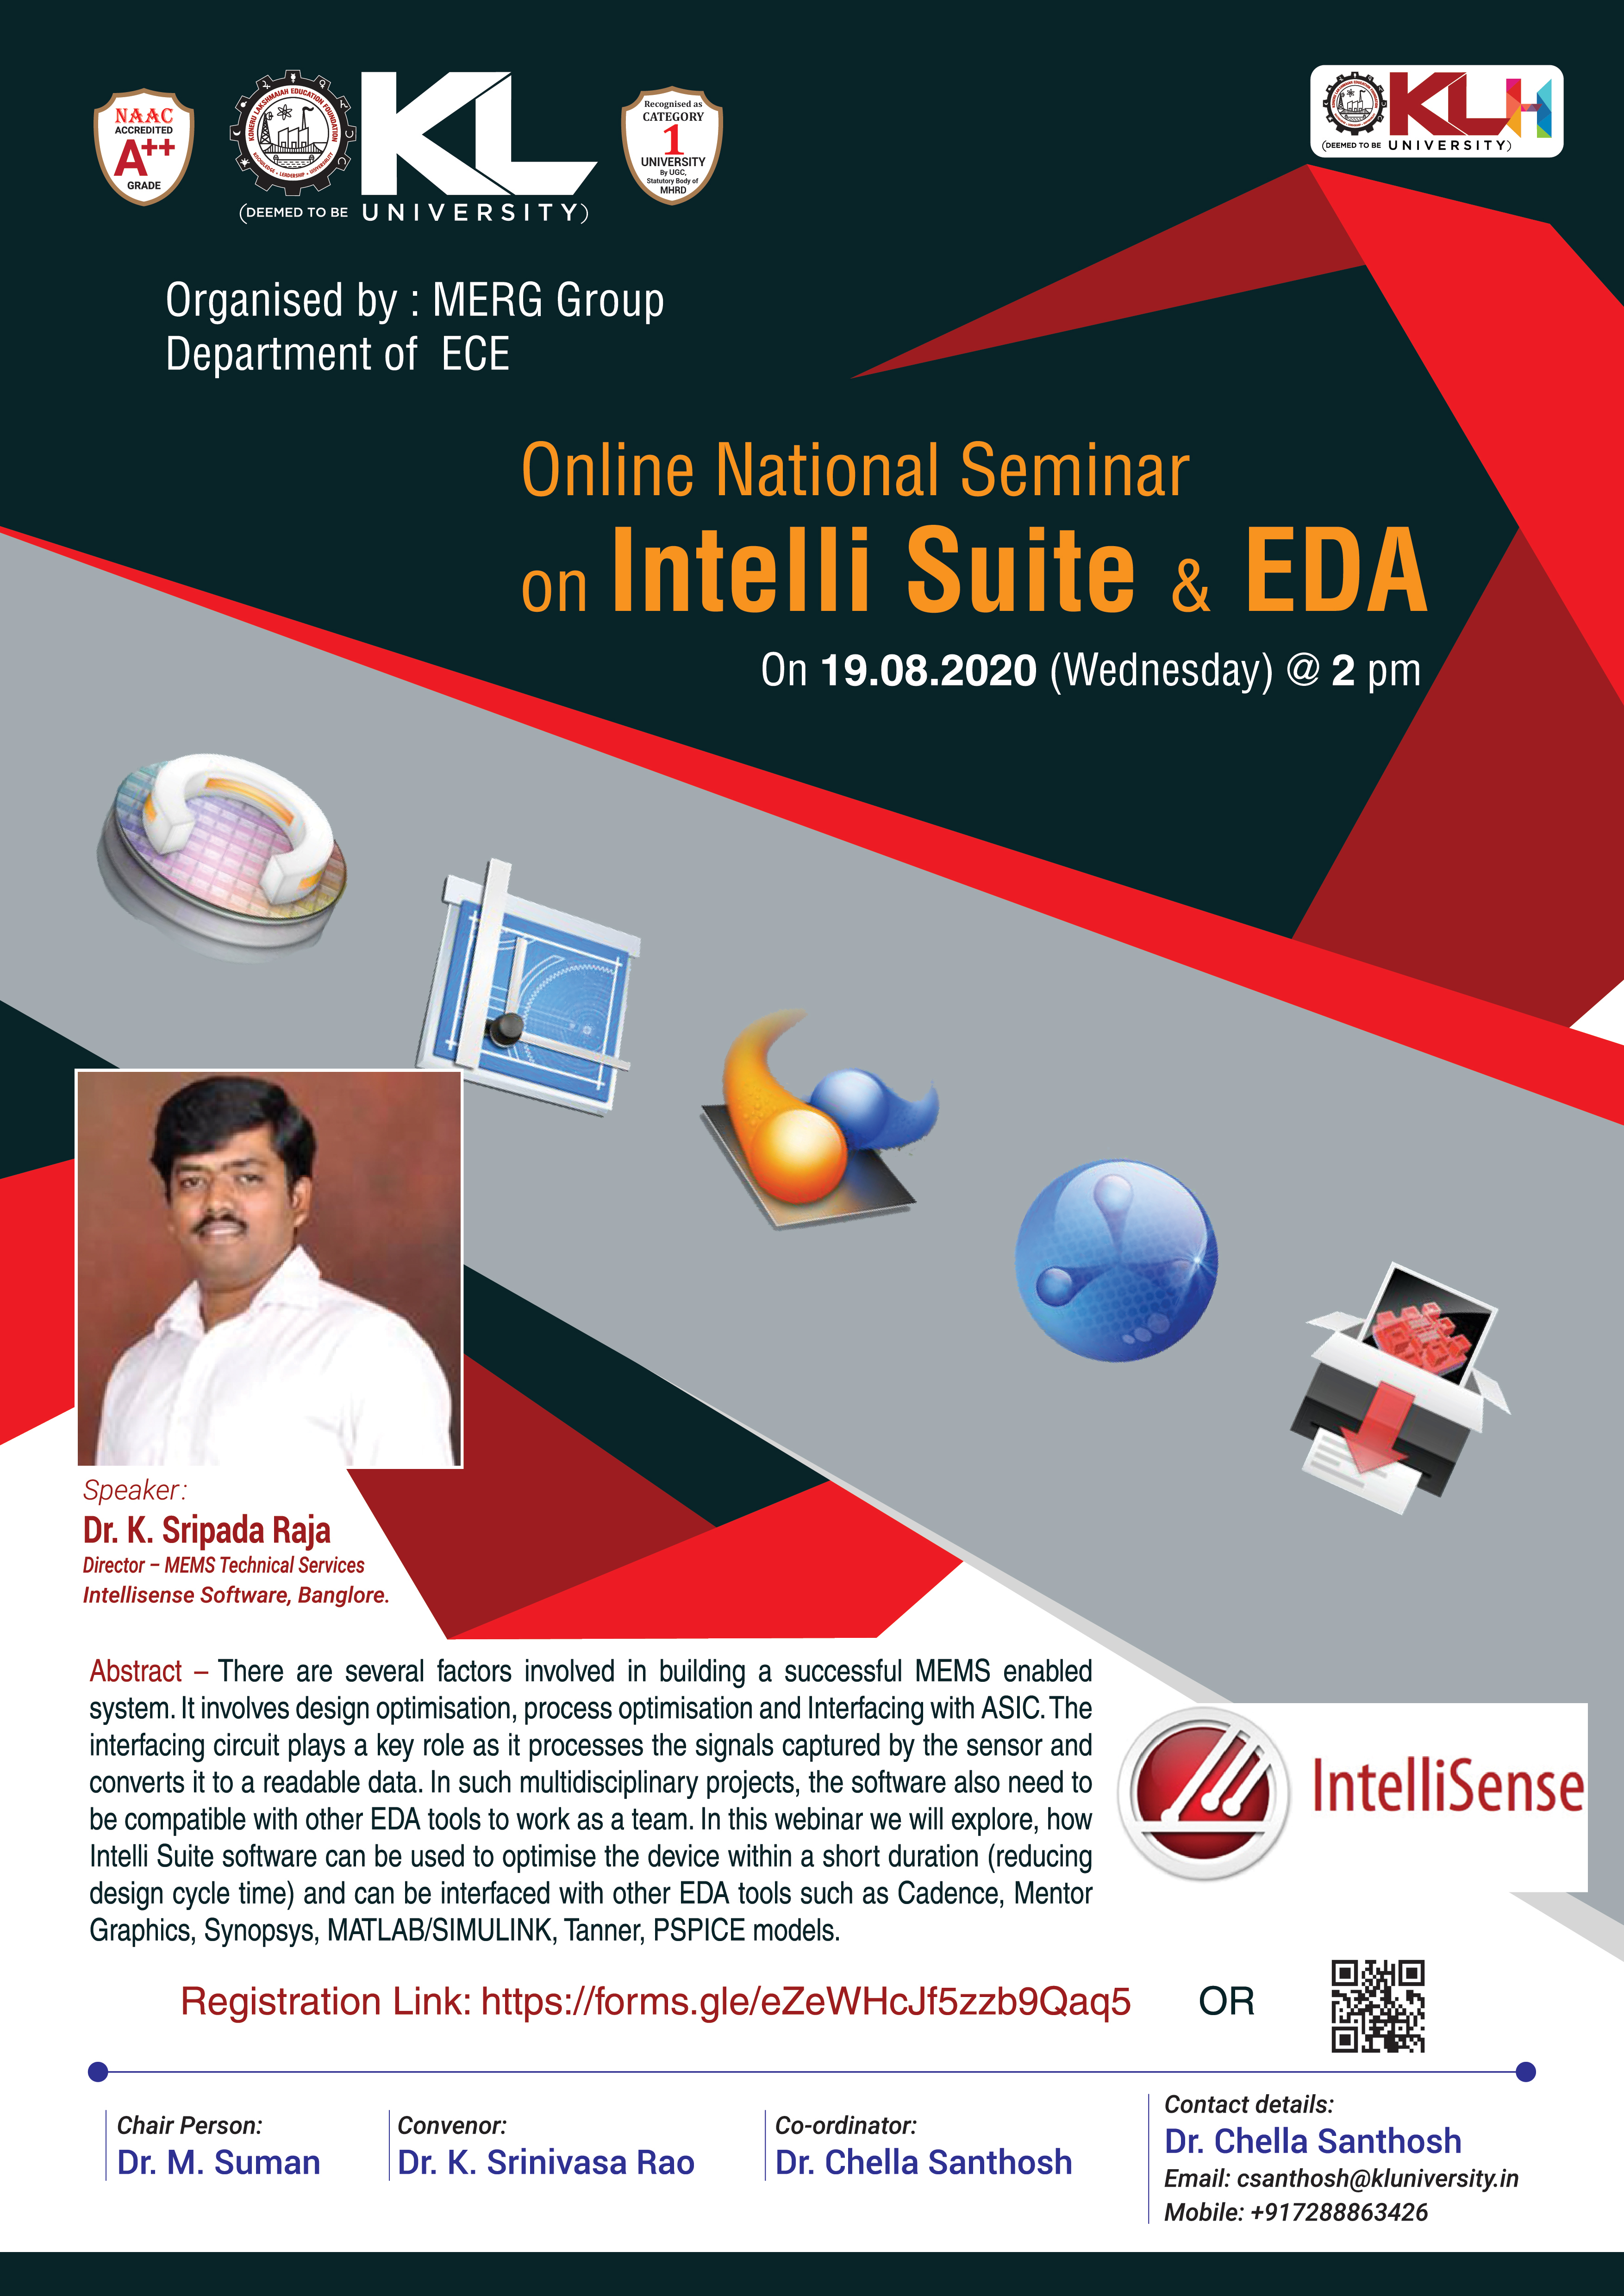 Webinar (14) on A One day National Seminar on Intelli Suite & EDA on 19.08.2020.